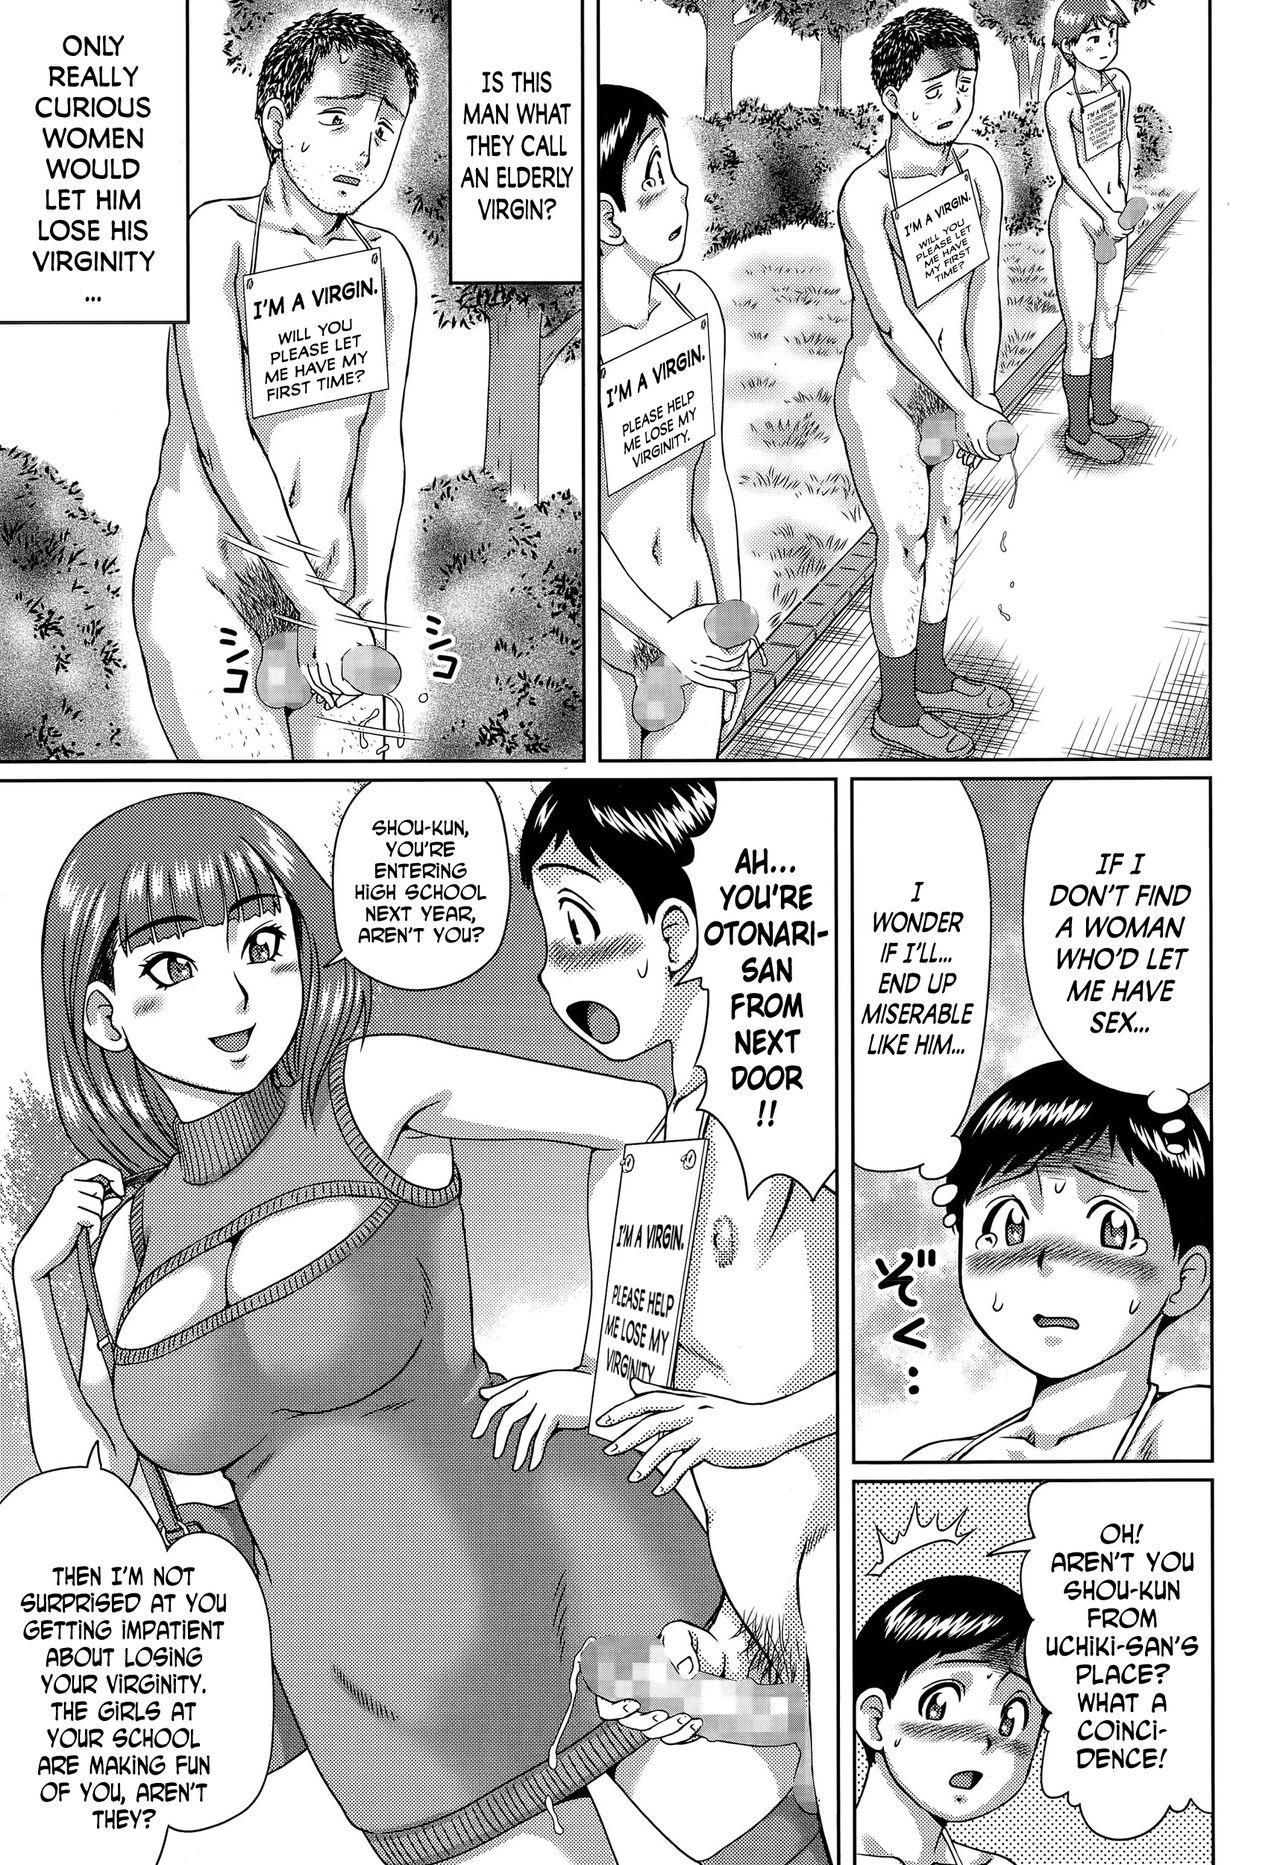 Shaking Fudeoroshi Kouen | A Park For Losing Your Virginity Free Amatuer - Page 3